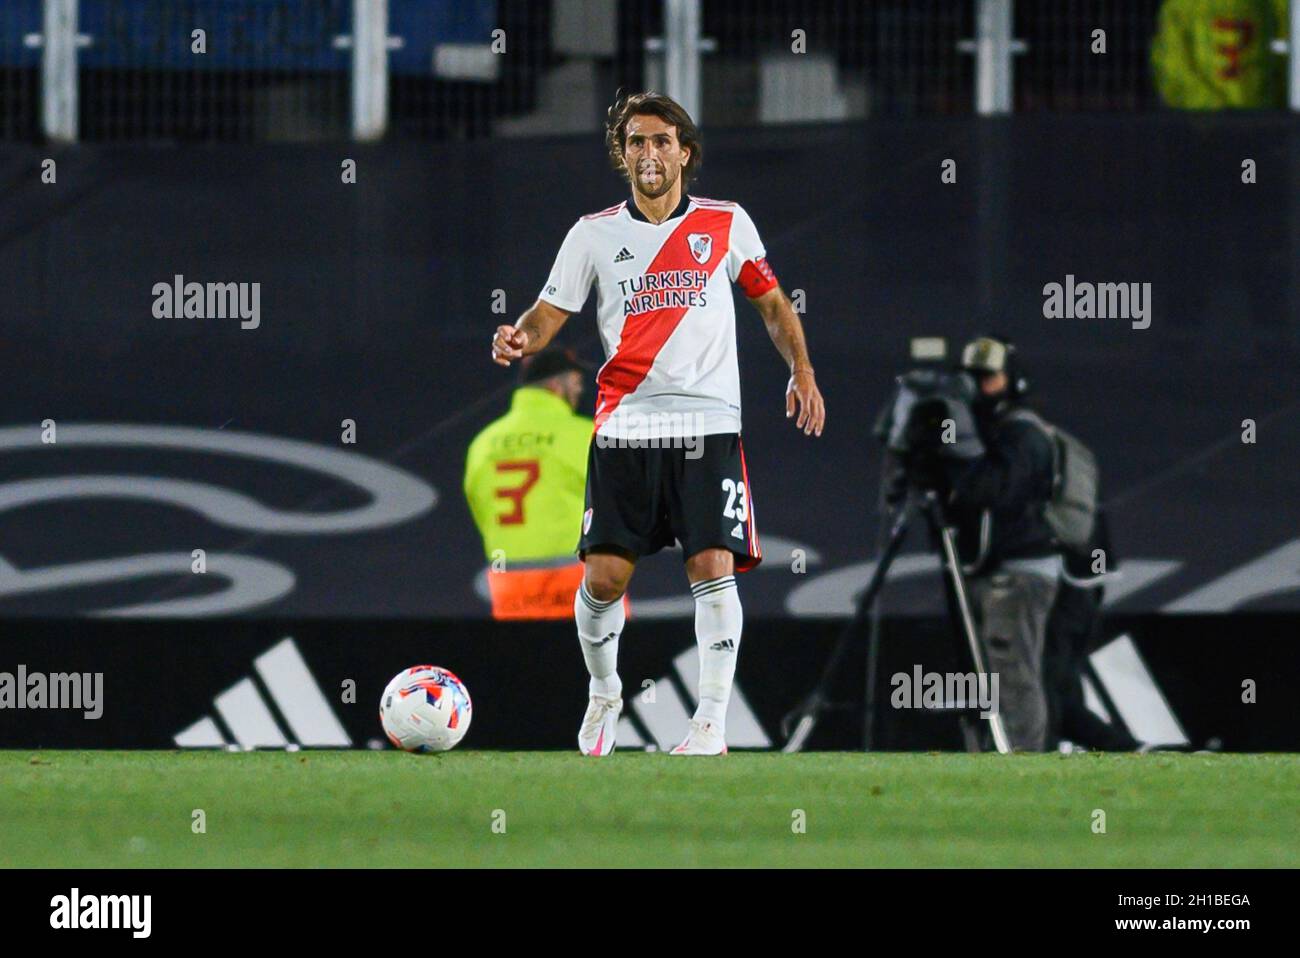 Buenos Aires, Argentina. 17th Oct, 2021. Leonardo Ponzio of River Plate  seen during the match between River Plate and San Lorenzo as part of Torneo  Liga Professional 2021 at Estadio Monumental Antonio